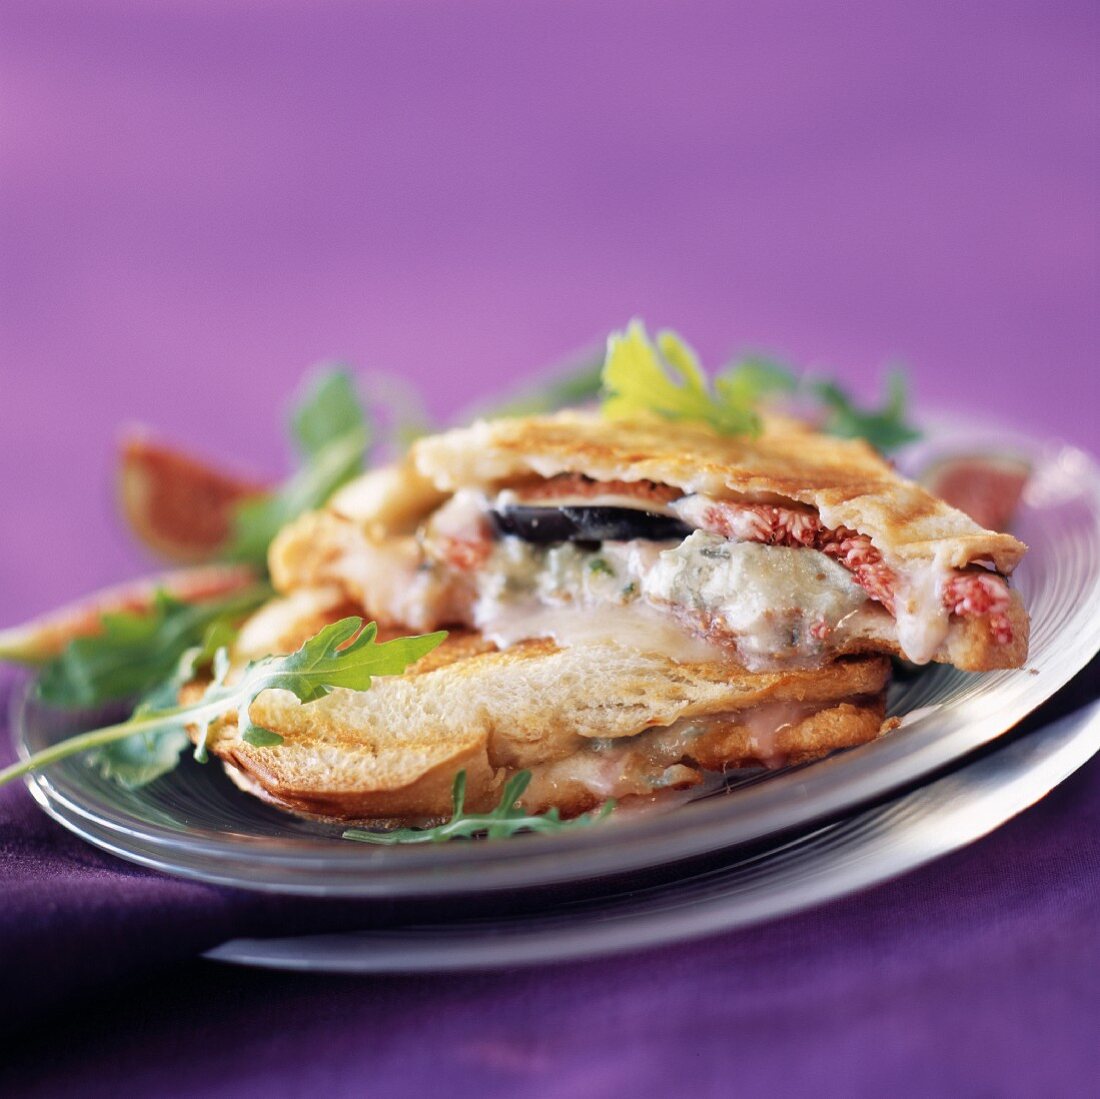 Gorgonzola and fig toasted sandwich